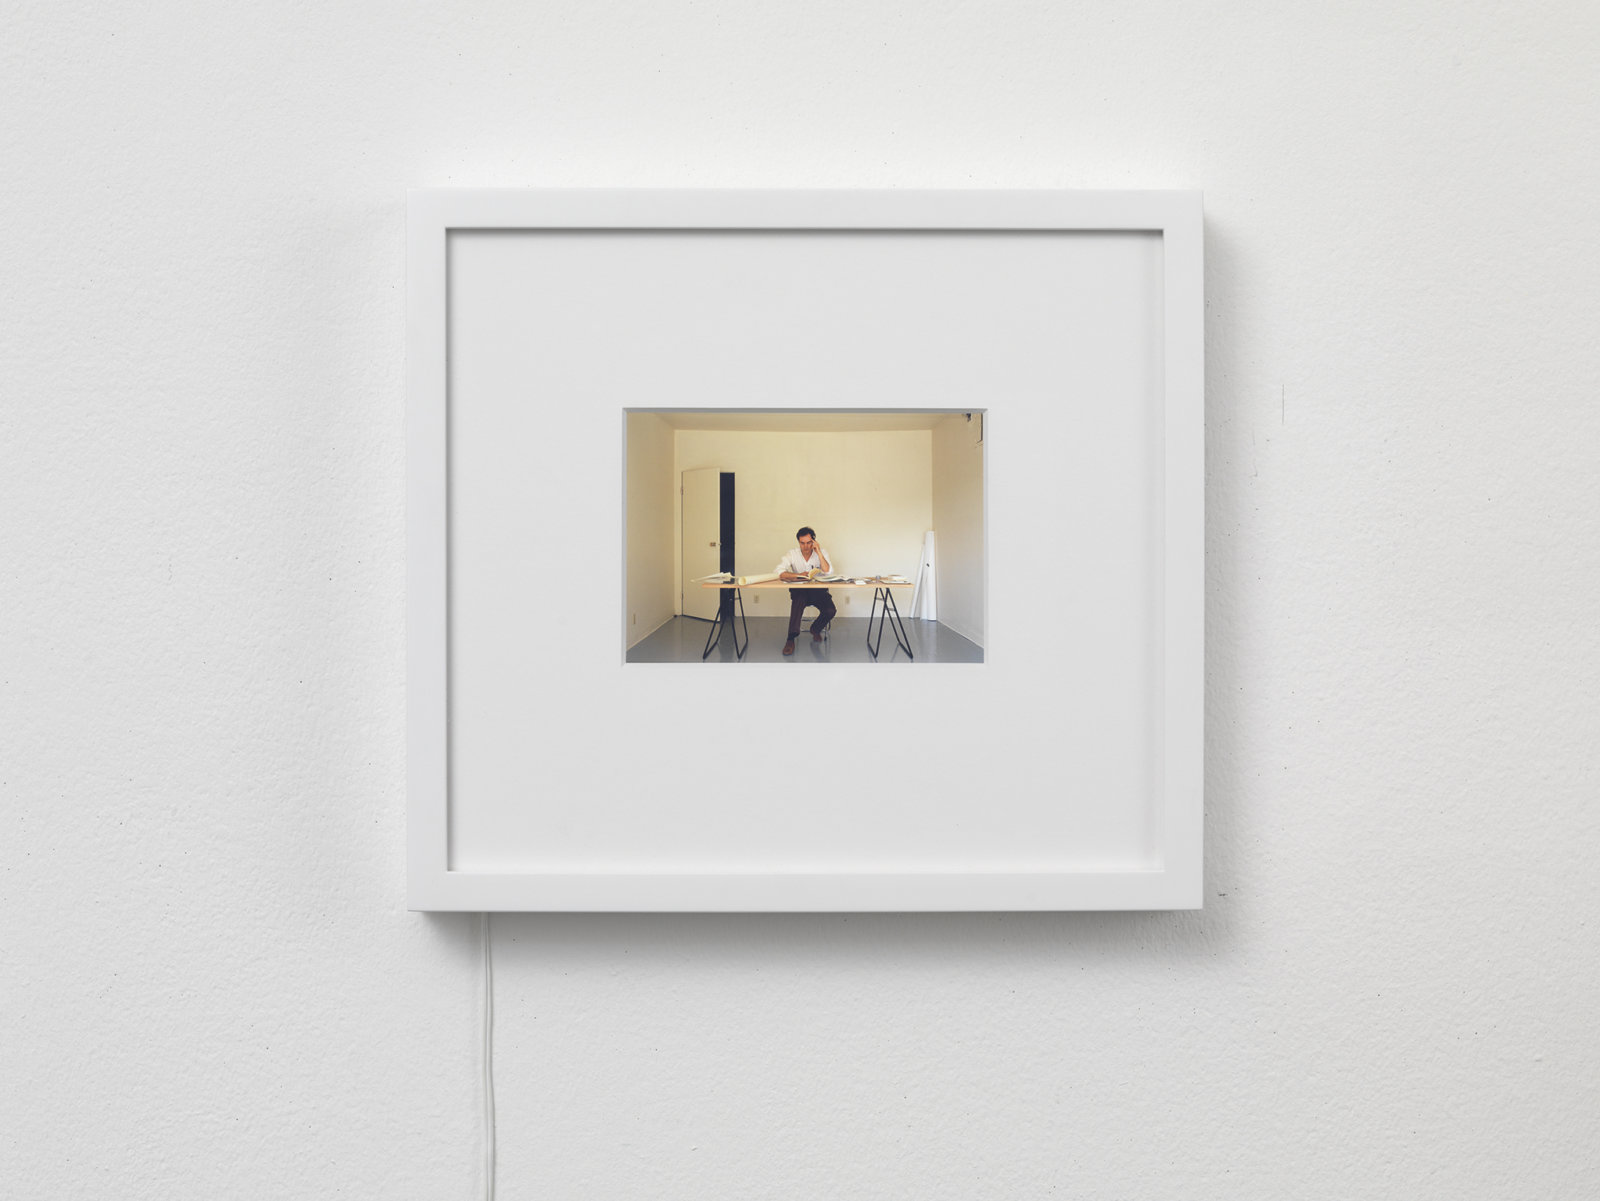 Ian Wallace, At Work 1983, 1983, backlit transparency, 15 x 13 in. (37 x 34 cm). Installation view, A Literature of Images, Witte de With, Rotterdam, 2008